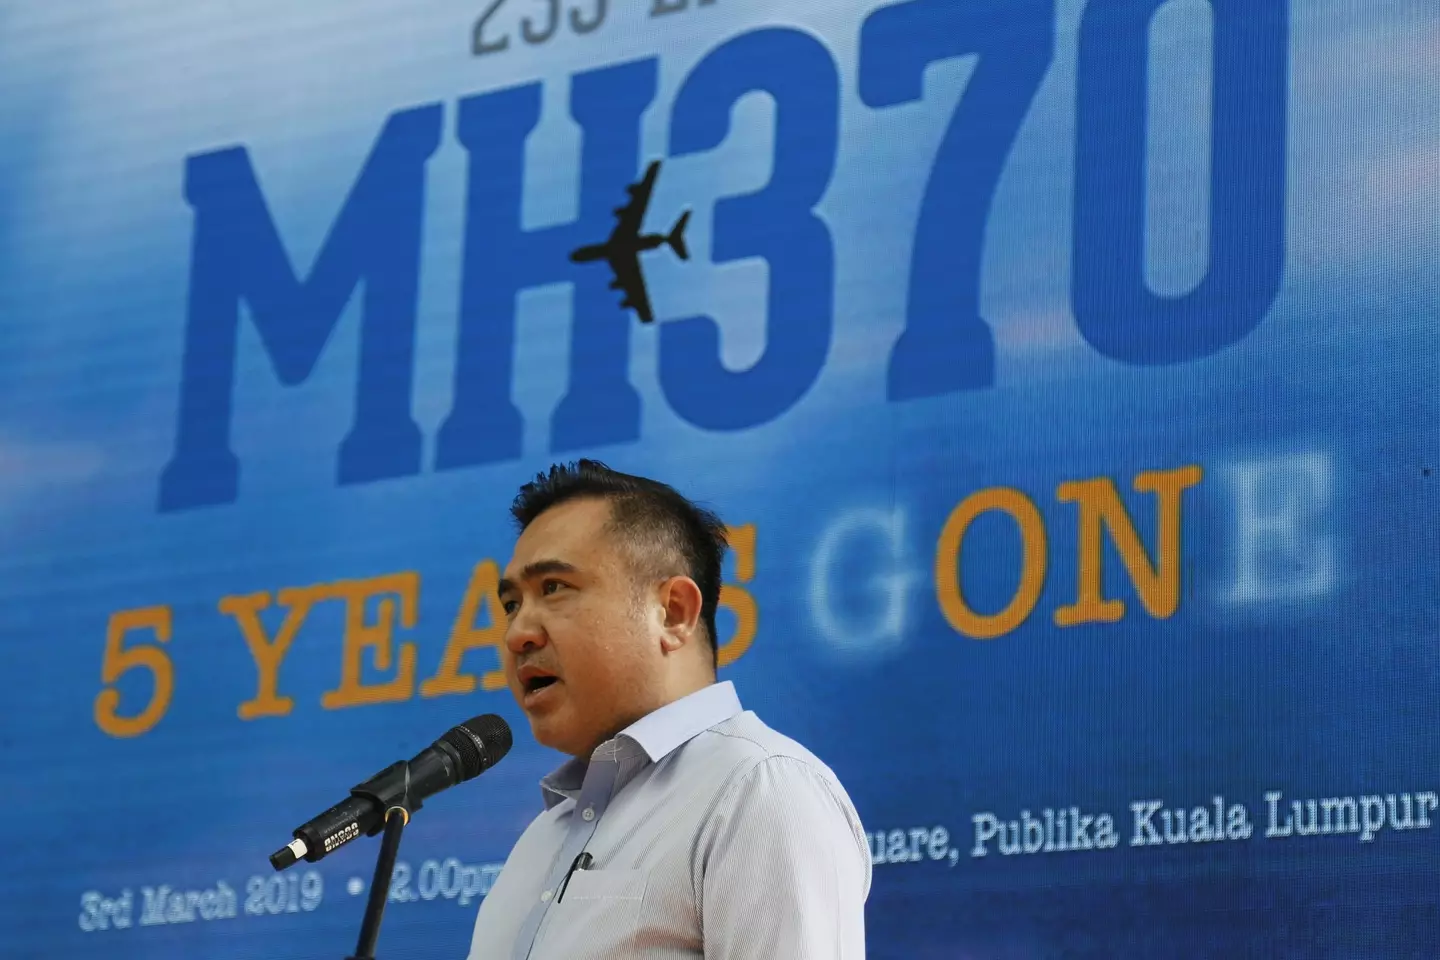 Malaysia's Transport Minister Anthony Loke said they are 'committed' to finding MH370.